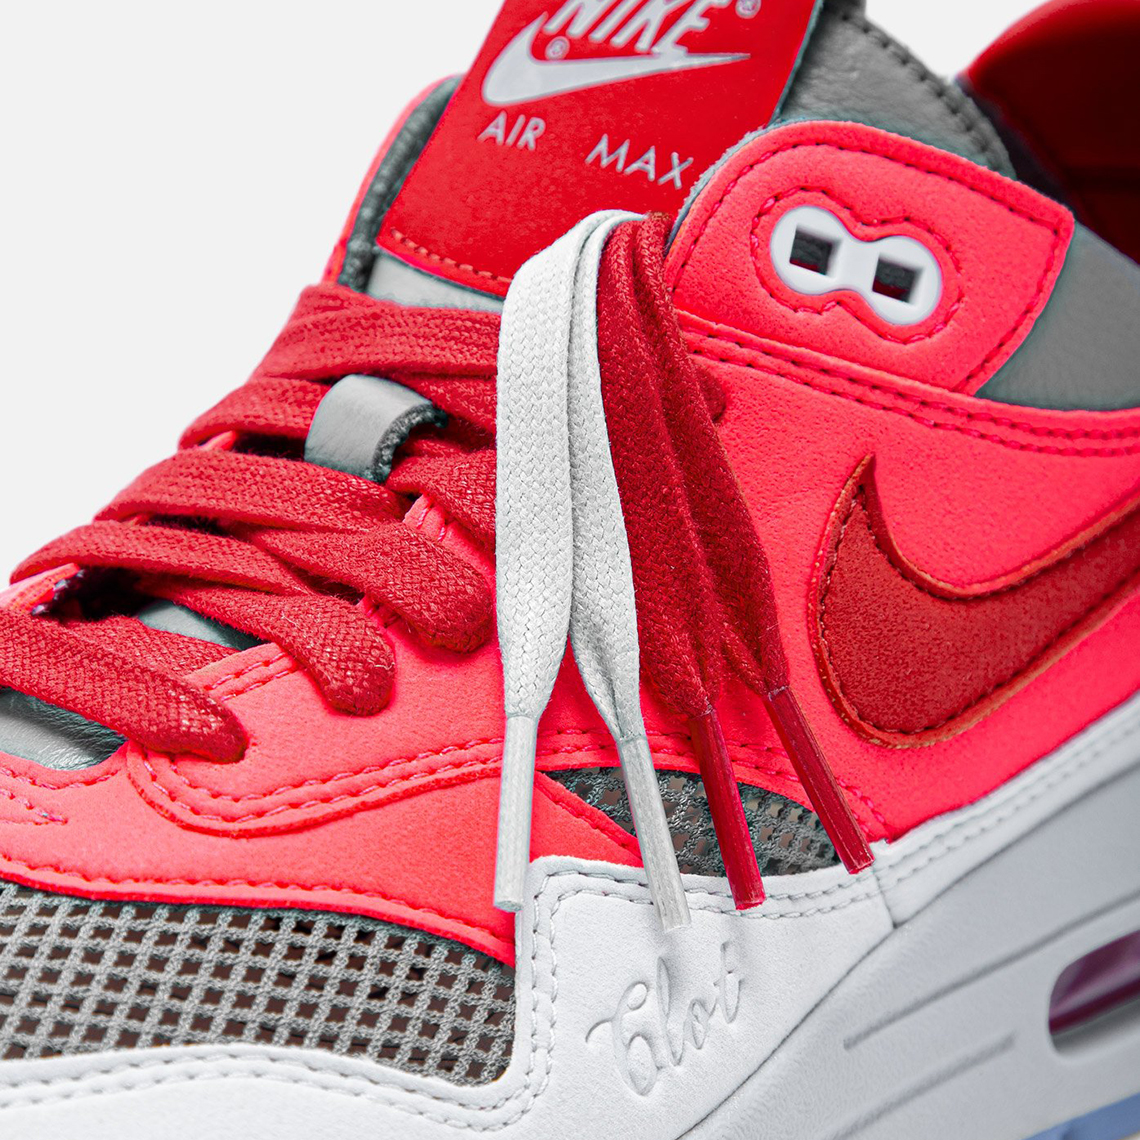 CLOT Nike Air Max 1 KOD Solar Red Release Date 12